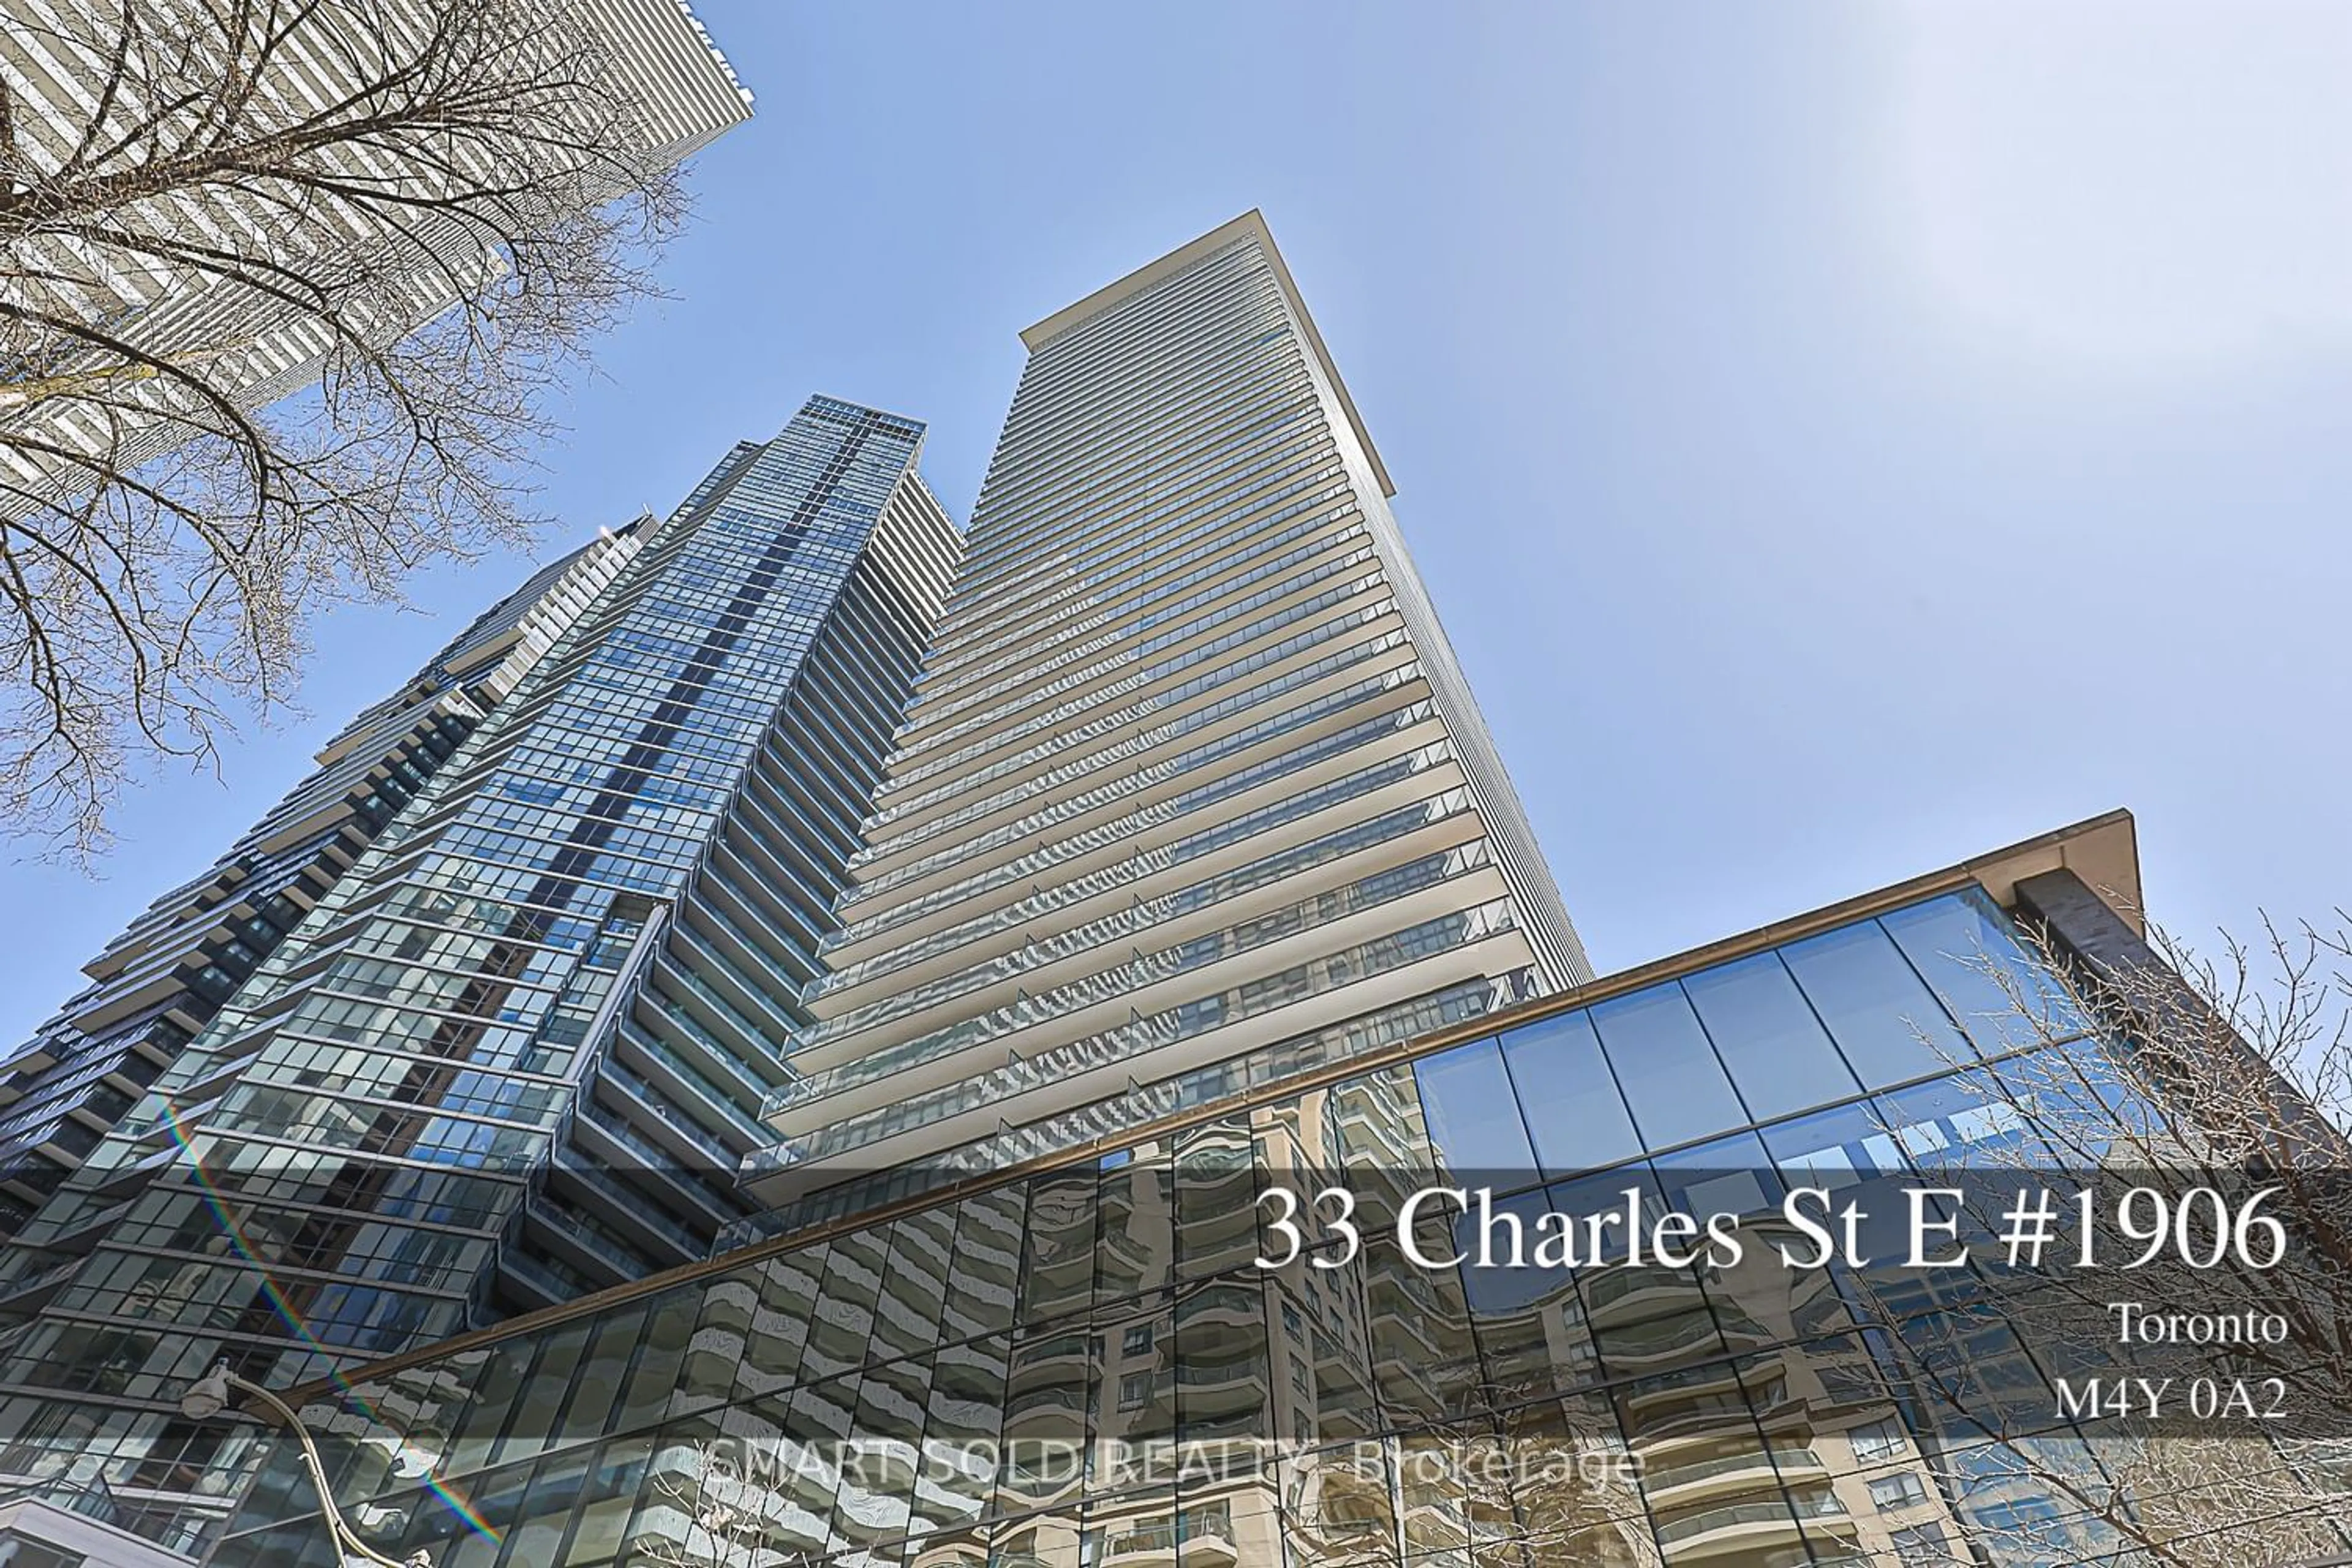 A pic from exterior of the house or condo for 33 Charles St #1906, Toronto Ontario M4Y 0A2